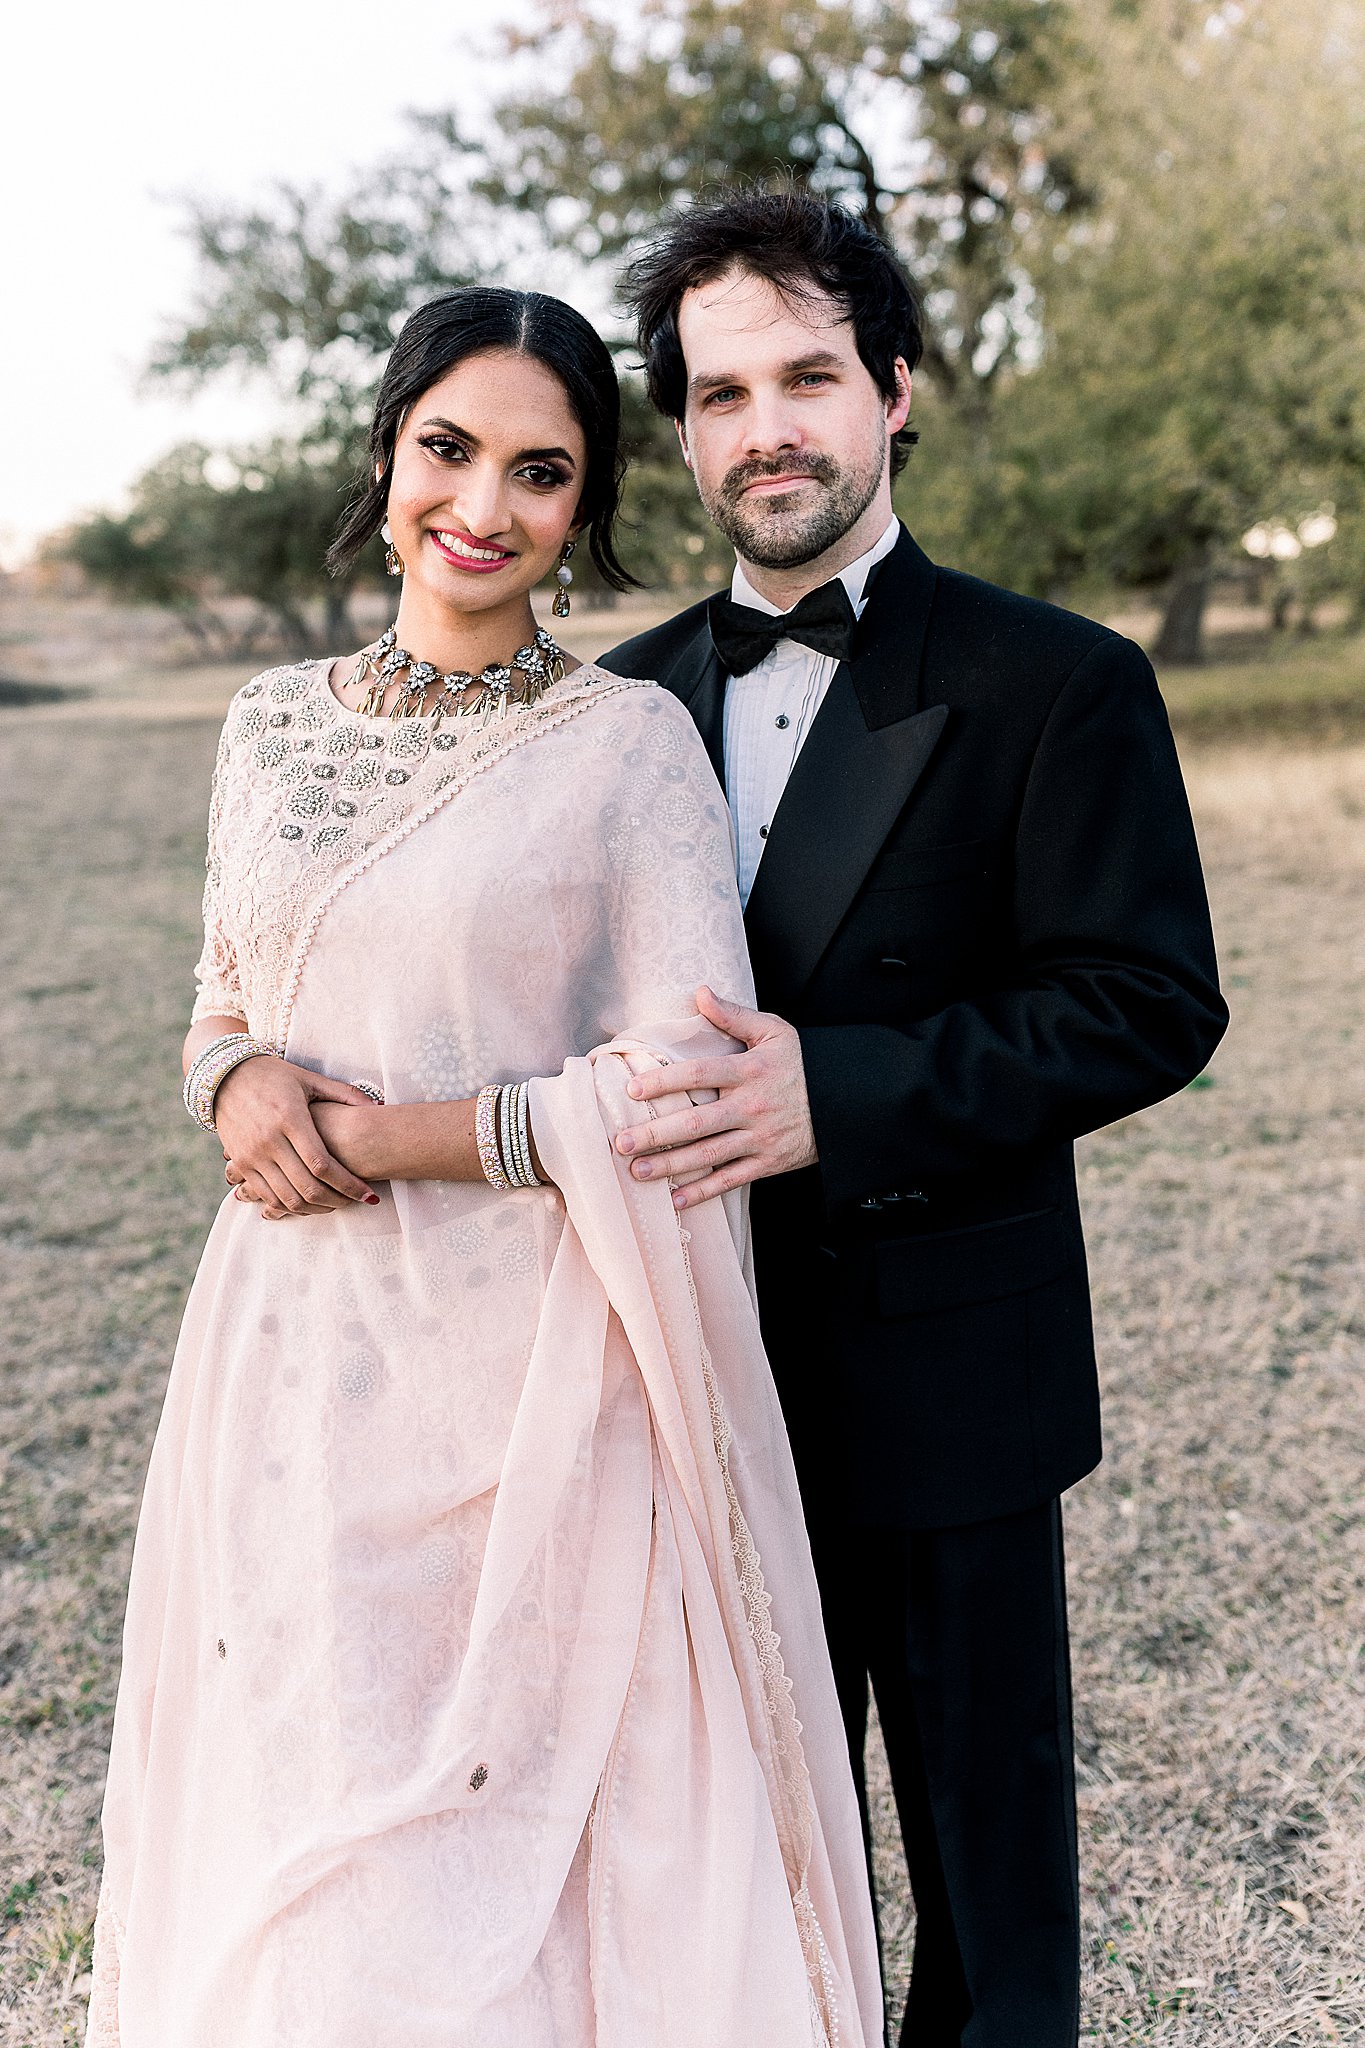 Bride and Groom at Indian Wedding in Texas Hill Country at Ma Maison Wedding Venue